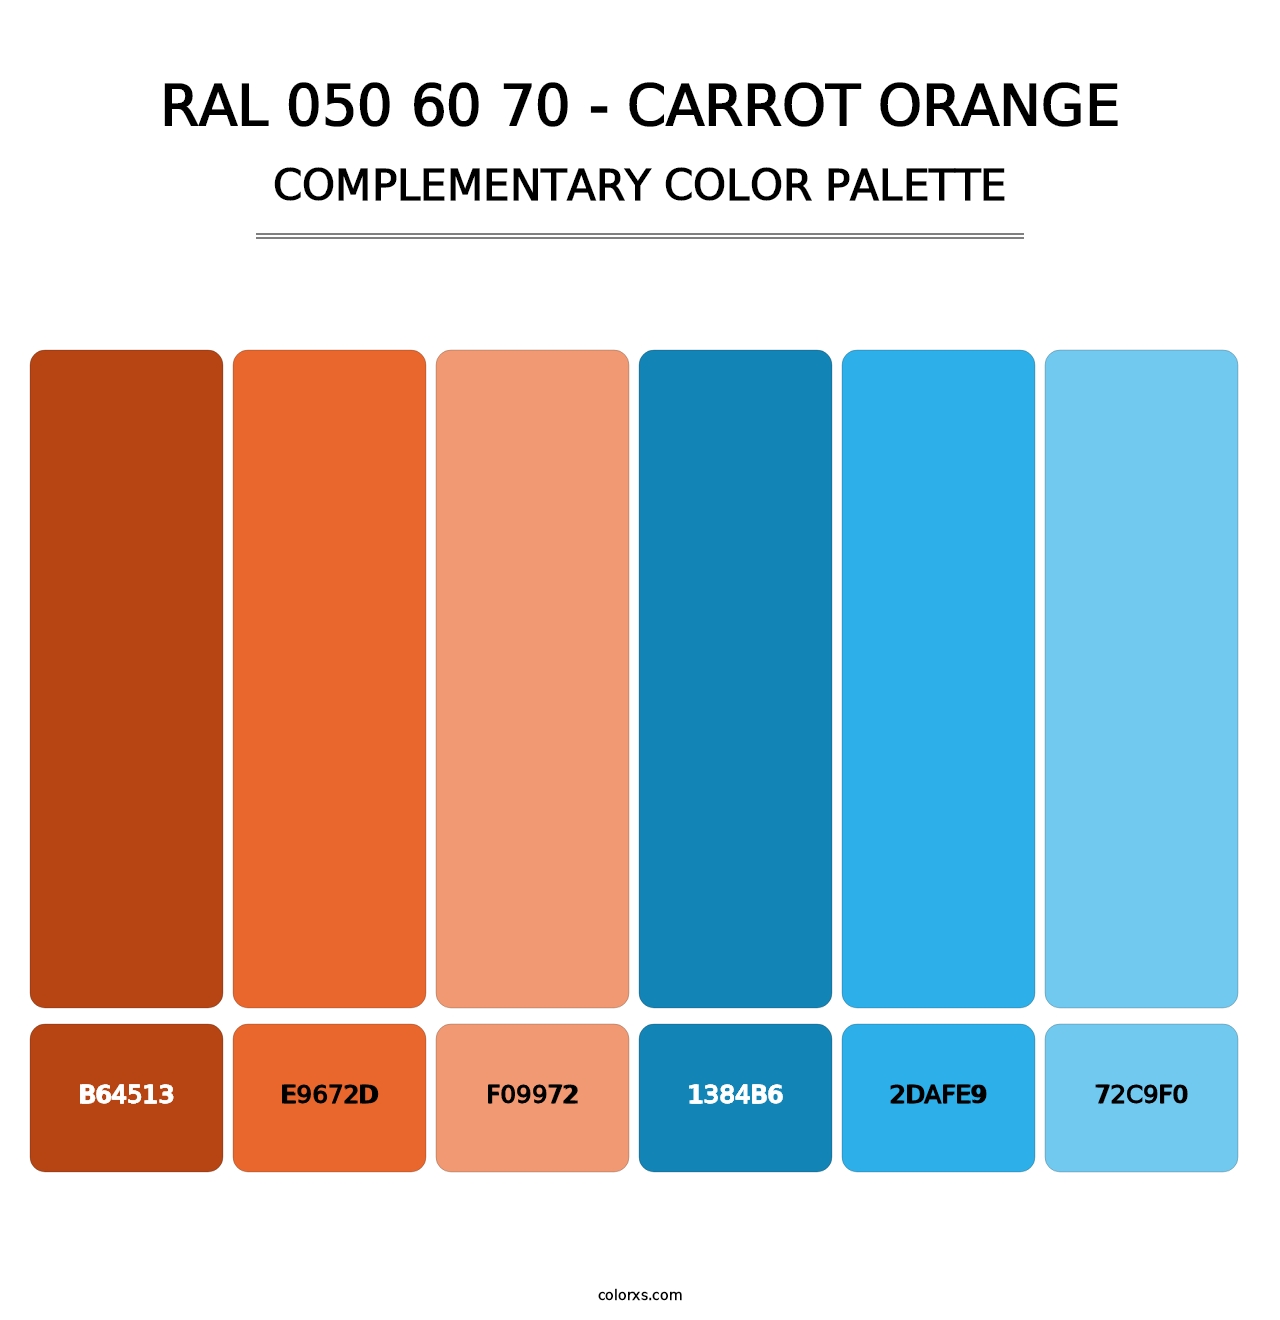 RAL 050 60 70 - Carrot Orange - Complementary Color Palette